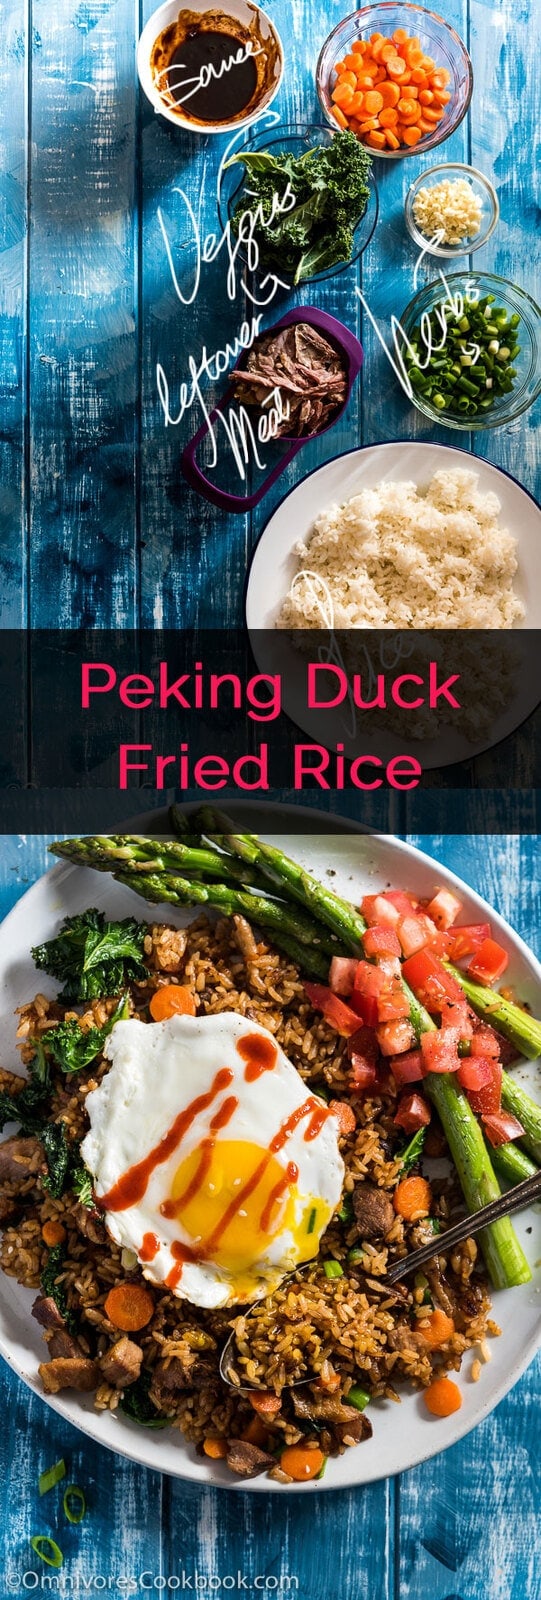 Peking duck fried rice tastes way better than takeout. Let me tell you a secret - you don’t need duck meat or a wok to cook this. | omnivorescookbook.com